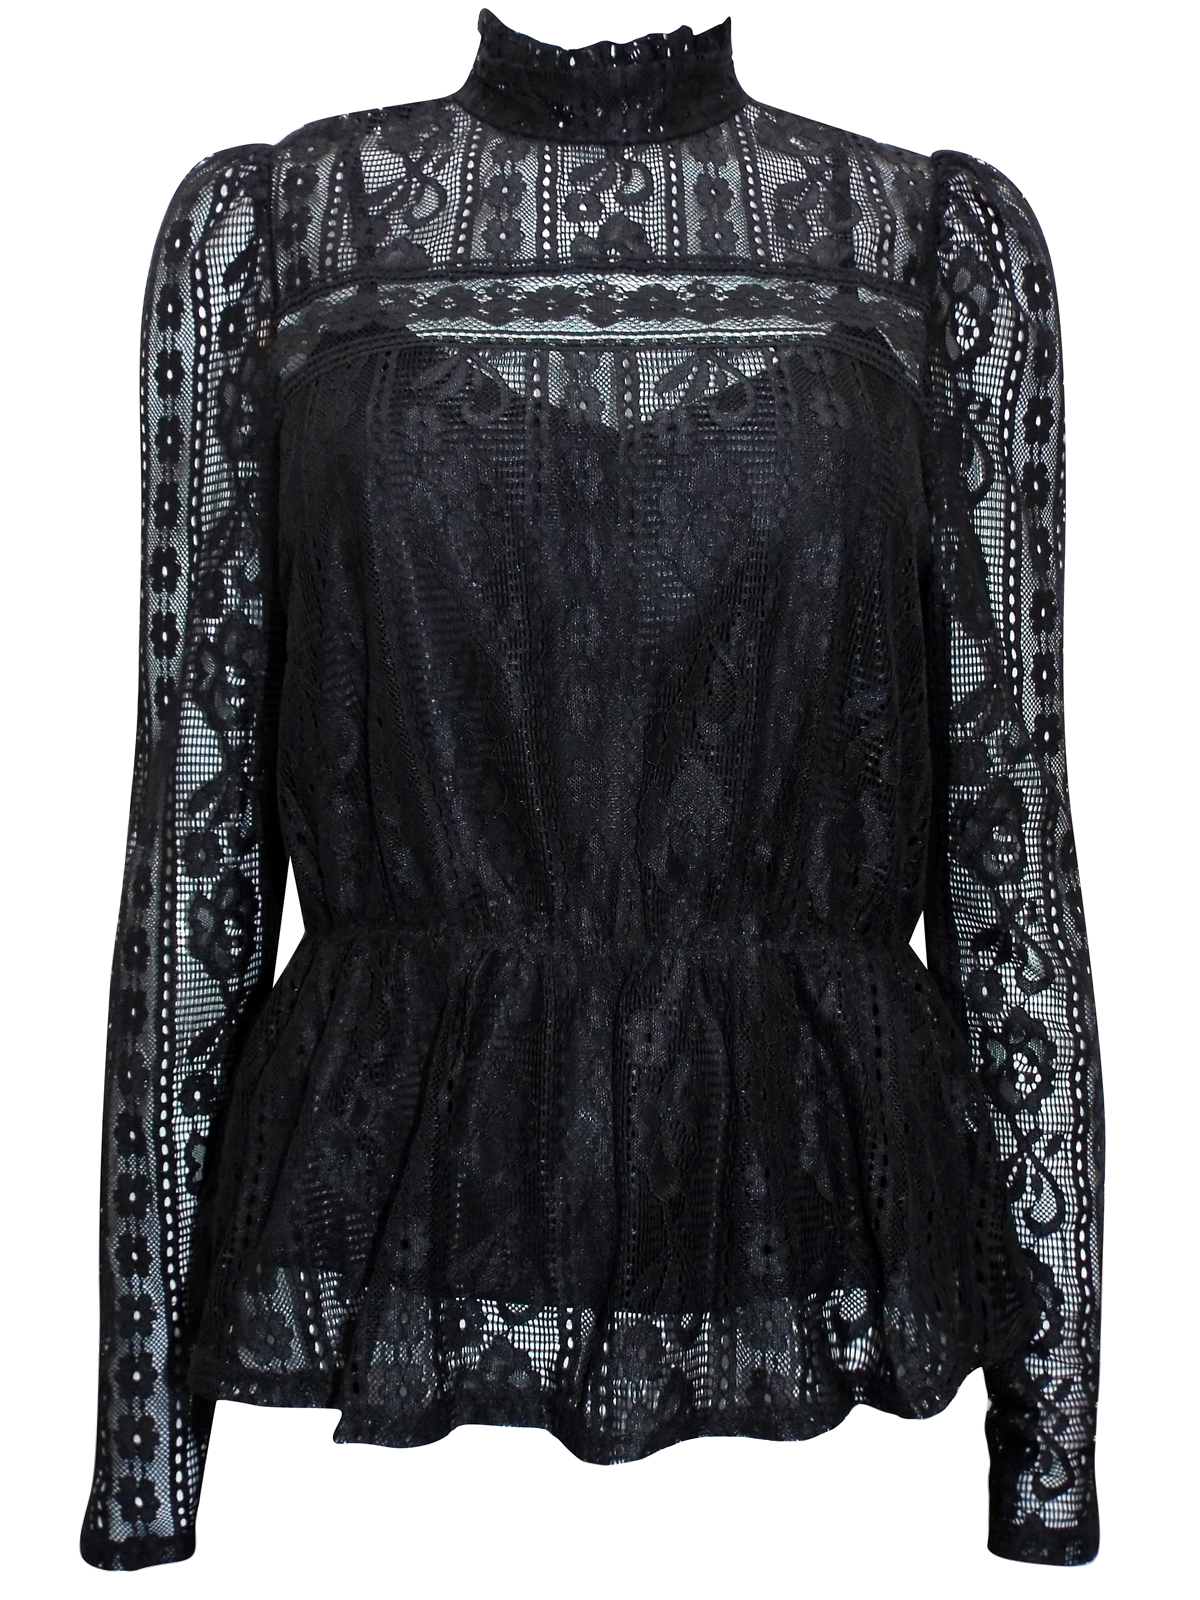 R1ver 1sland BLACK Lace High Neck Victoriana Blouse - Size 6 to 18